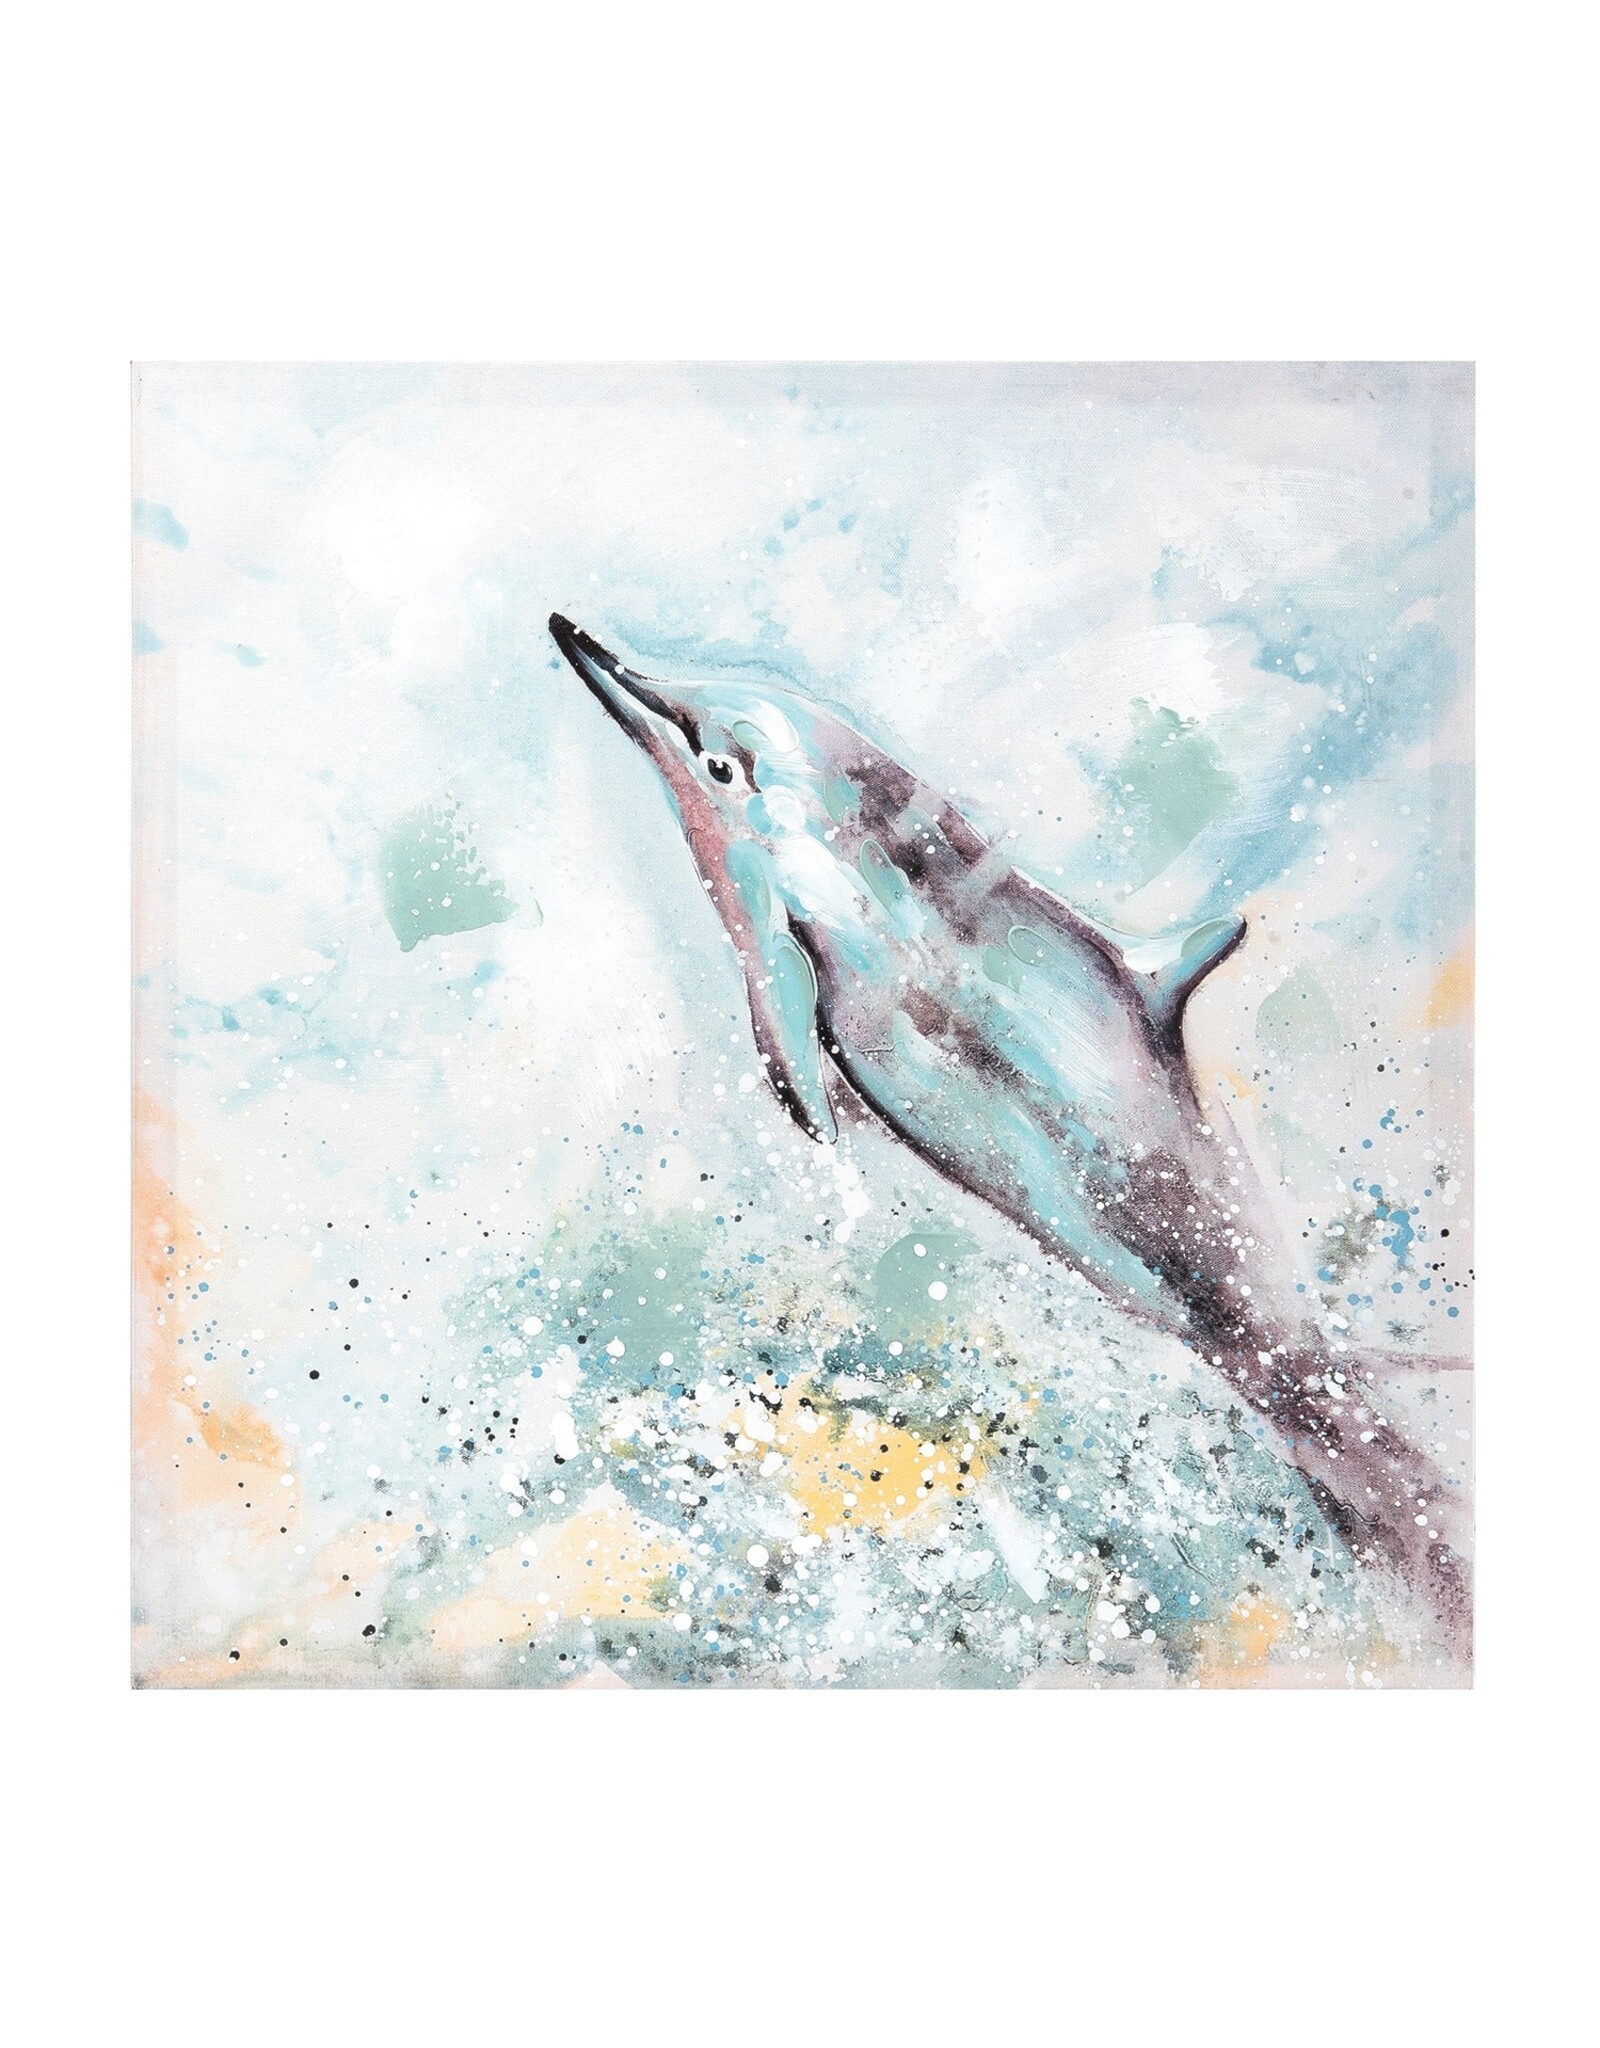 Wall Art - Dolphin Leaping 20x20